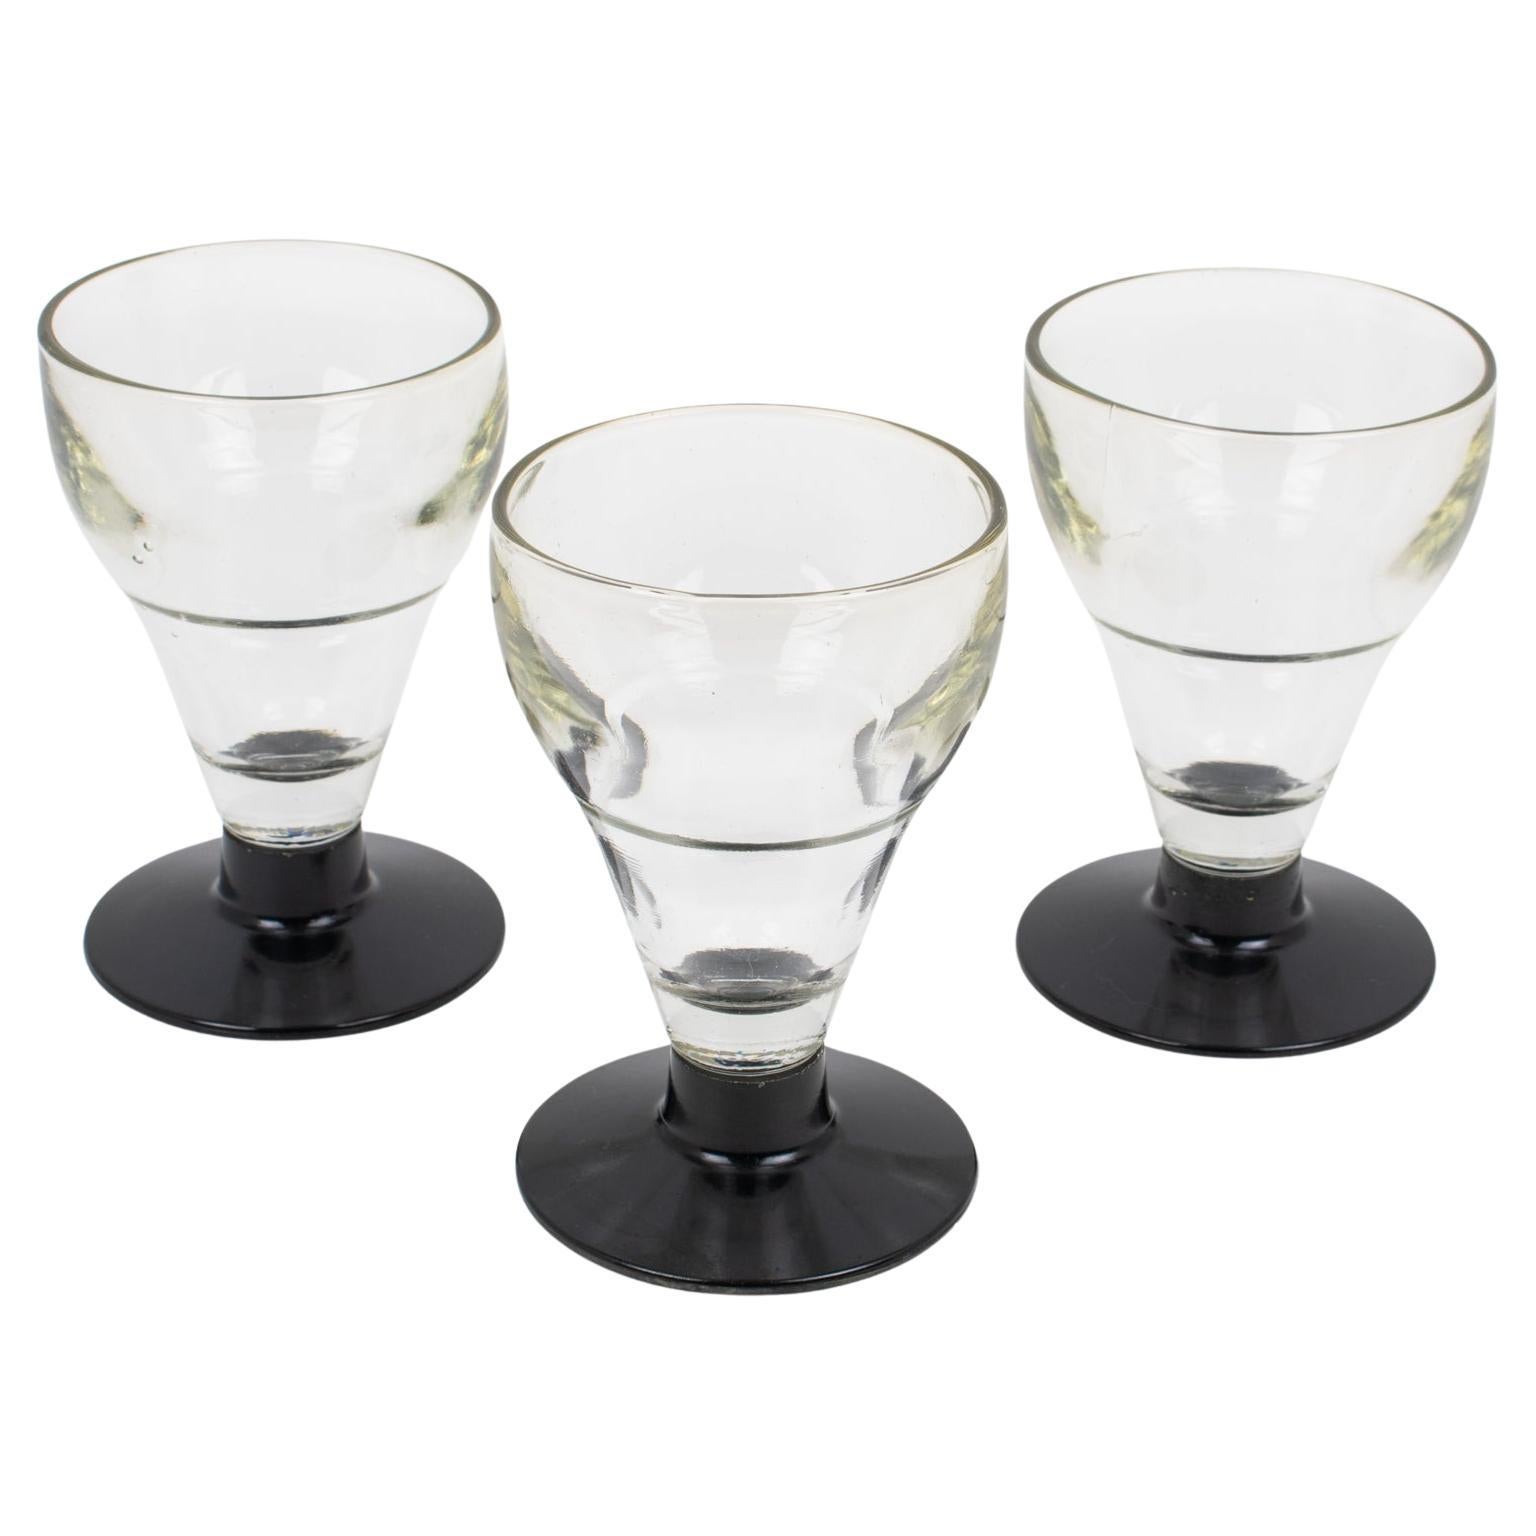 Hand-Blown Glass and Bakelite Absinthe Glasses Set, 3 pieces, France 1910s